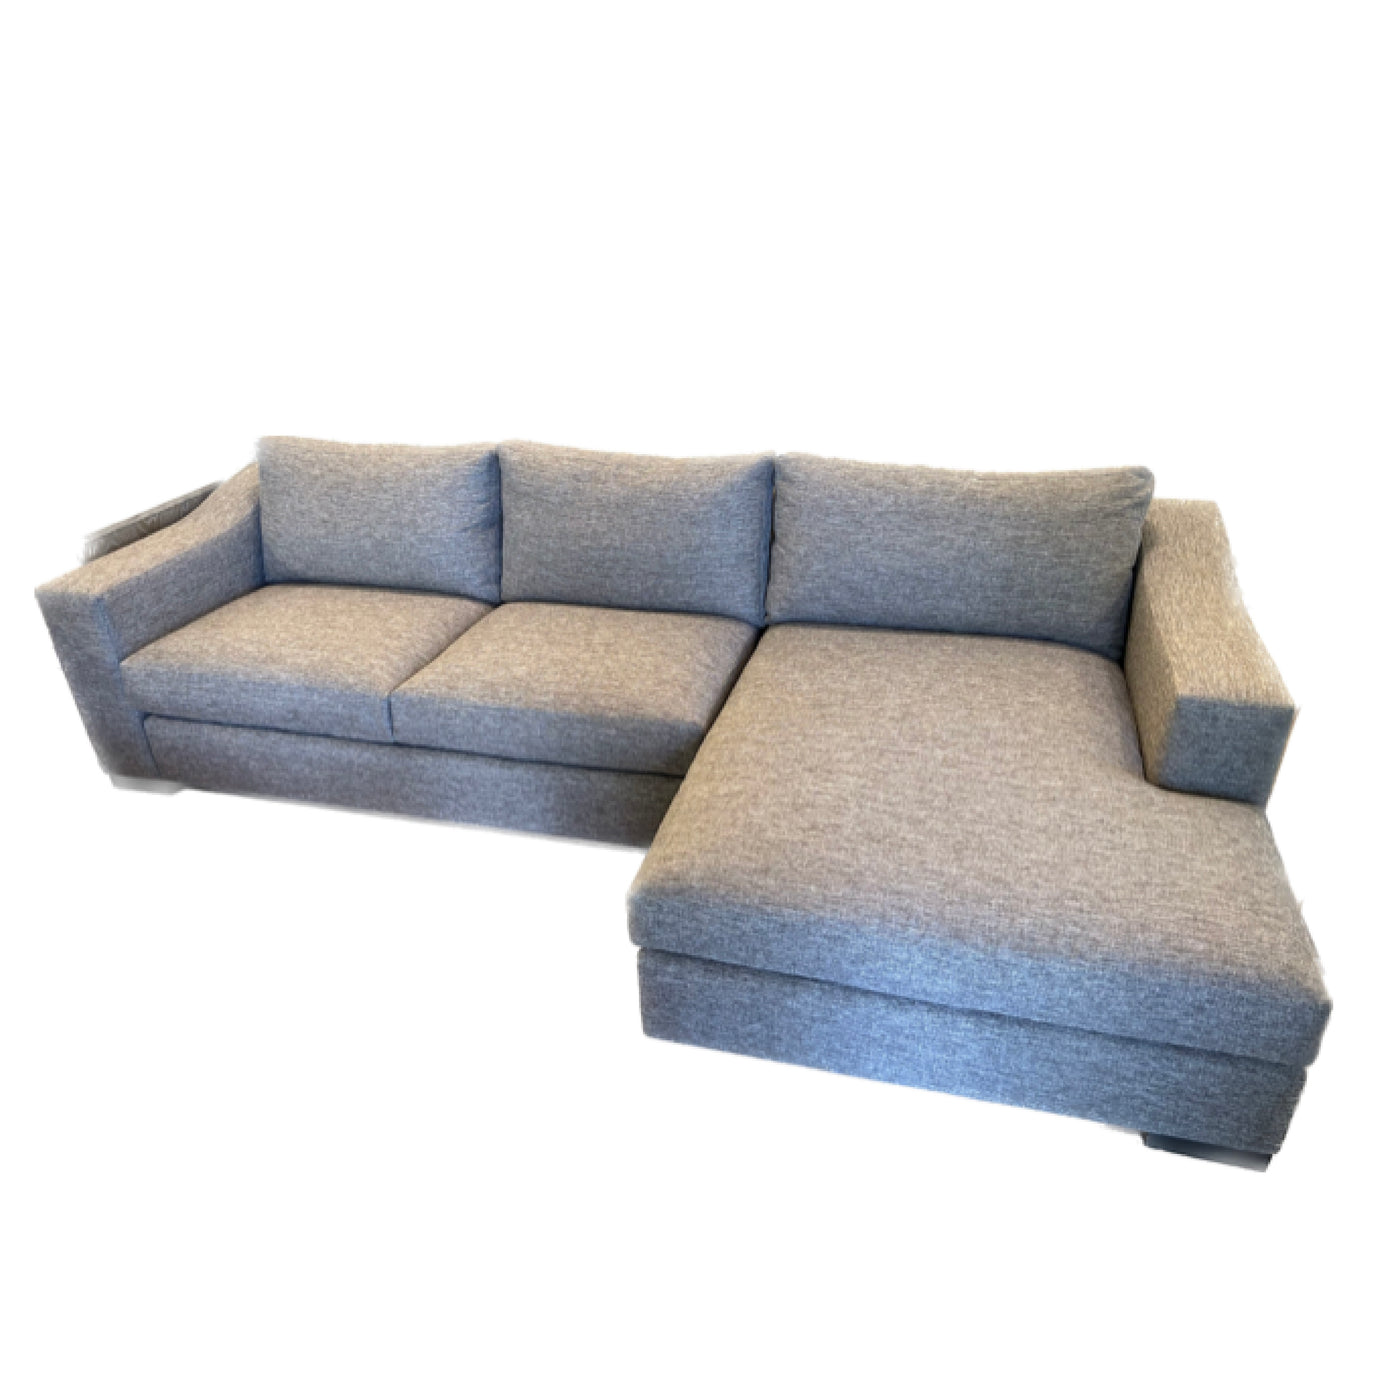 SOFA SECTIONAL 2 PIECE X FRED IN VIGOR ALABASTER